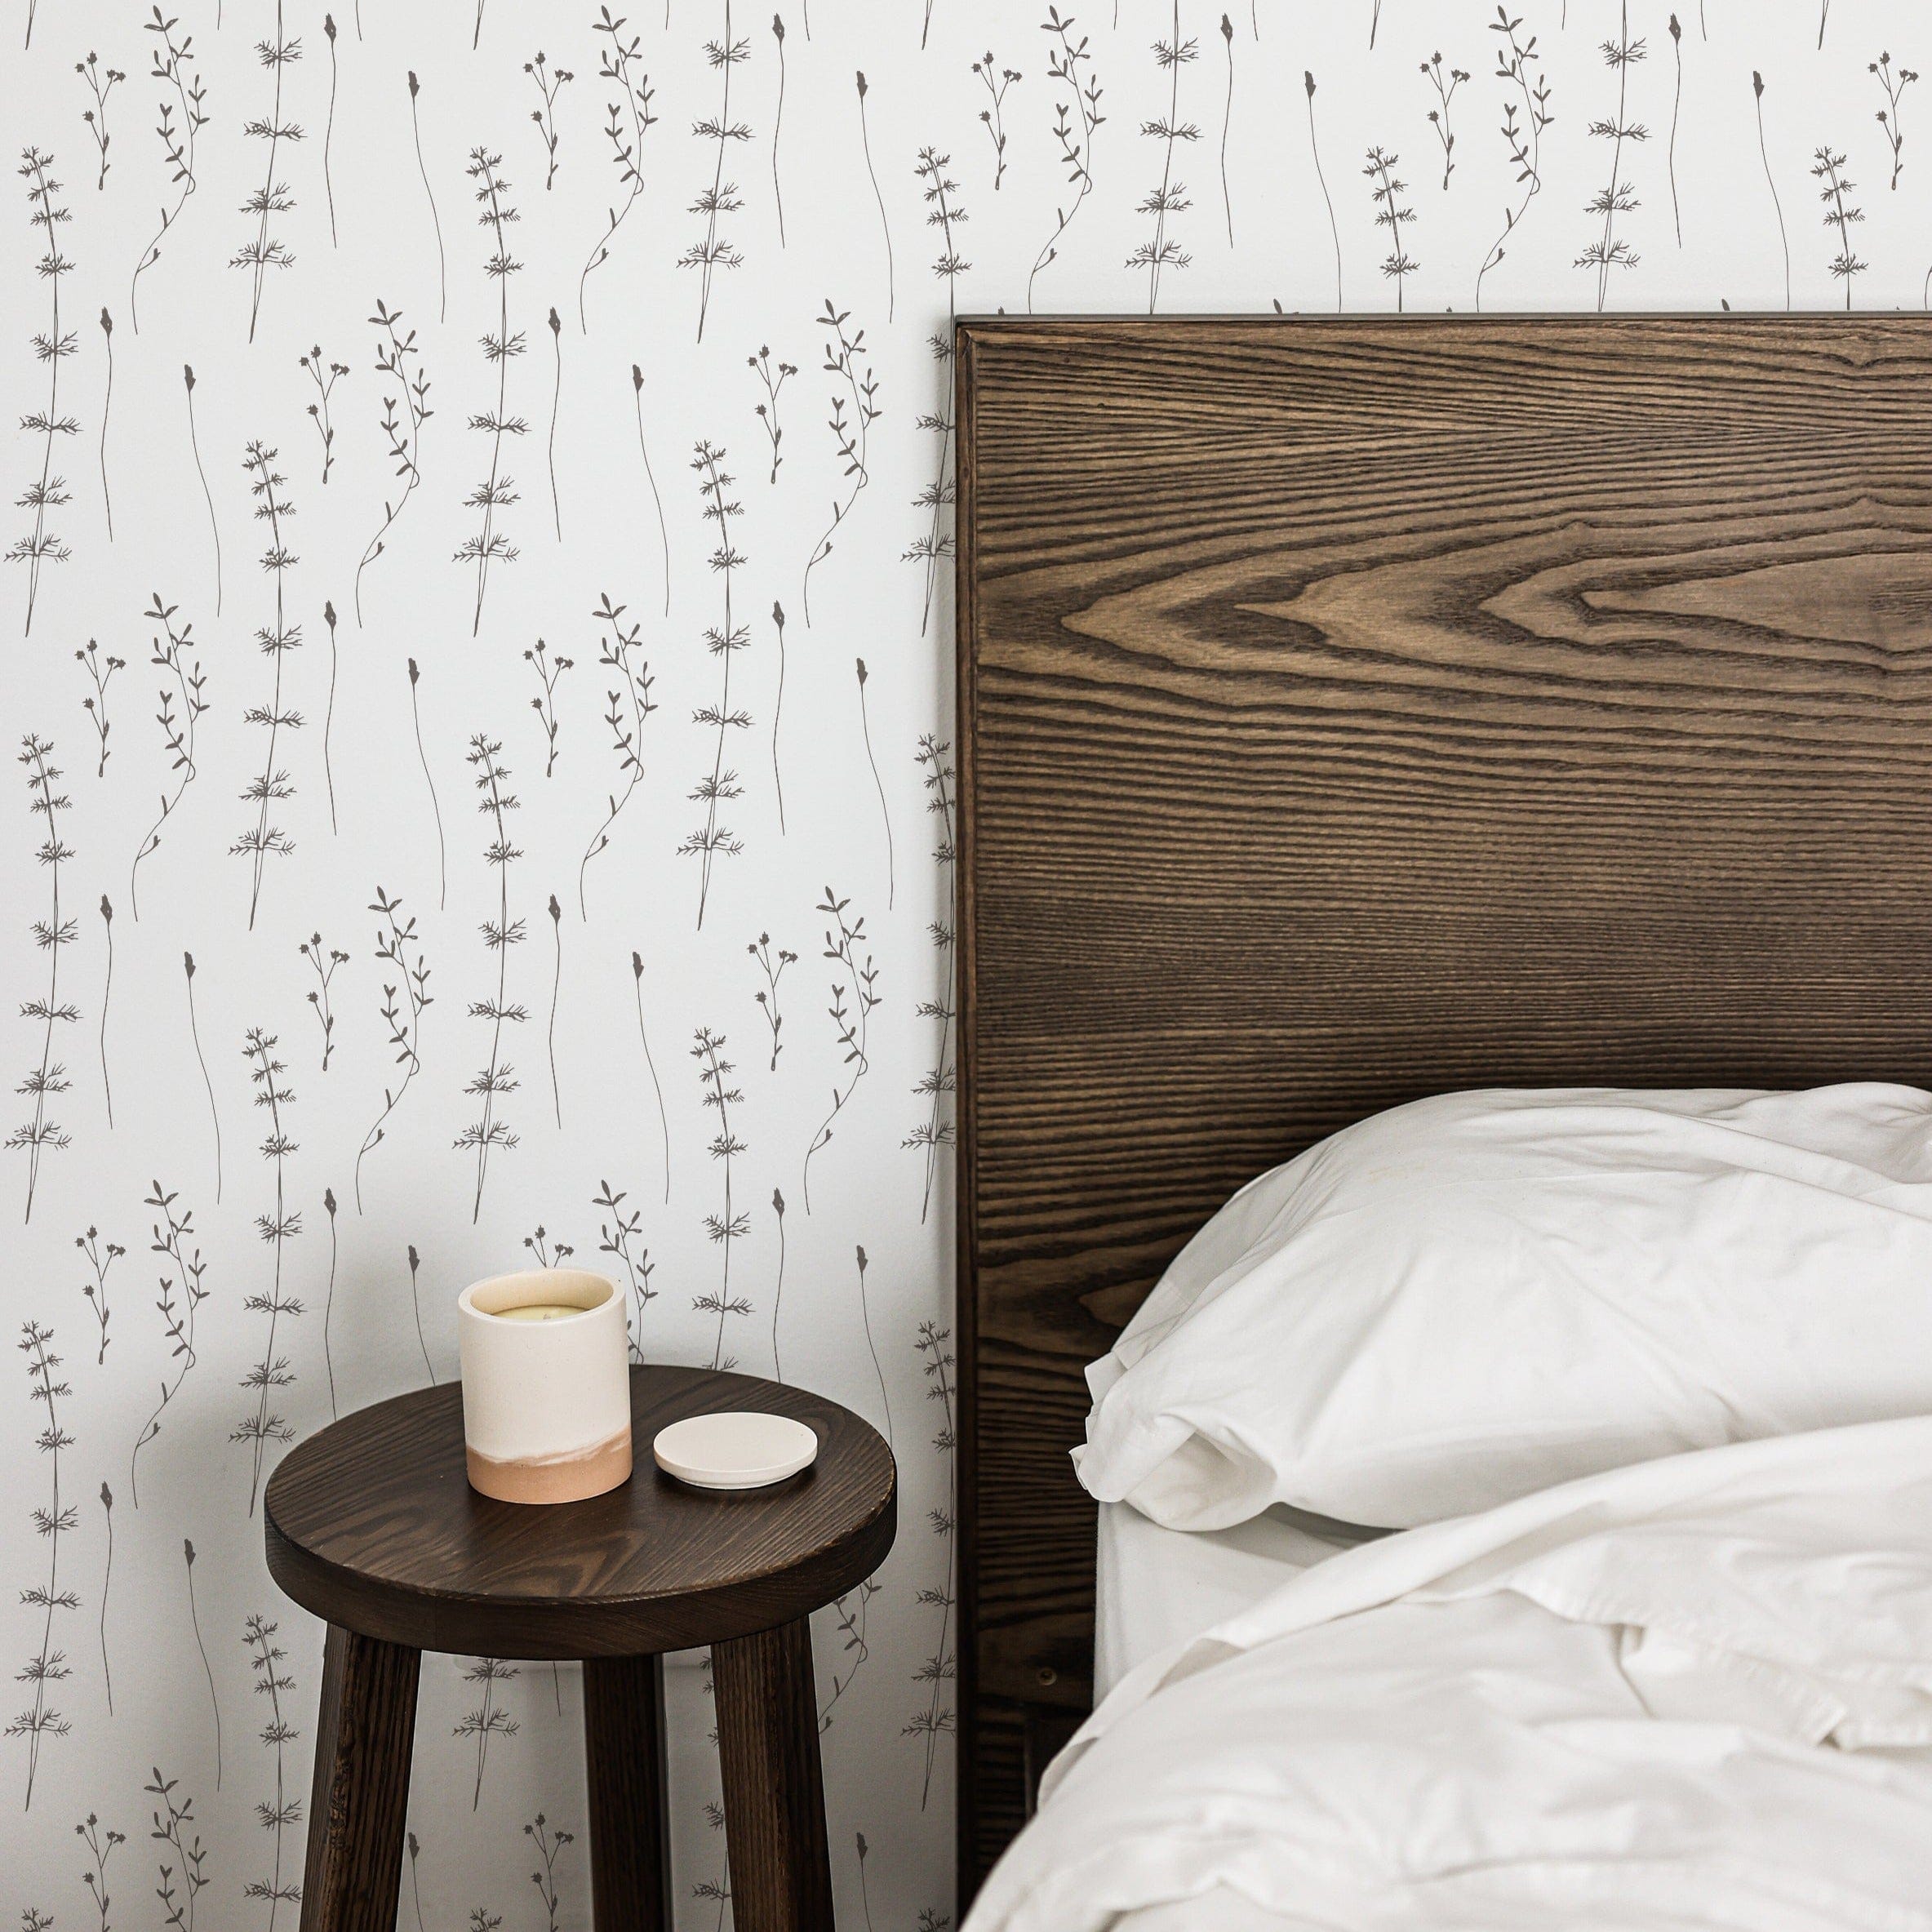 A minimalist bedroom scene featuring Delicate Wildflower Wallpaper. A wooden bed frame adjacent to a small round side table, which holds a ceramic candle holder, enhances the organic and tranquil ambiance created by the floral pattern.